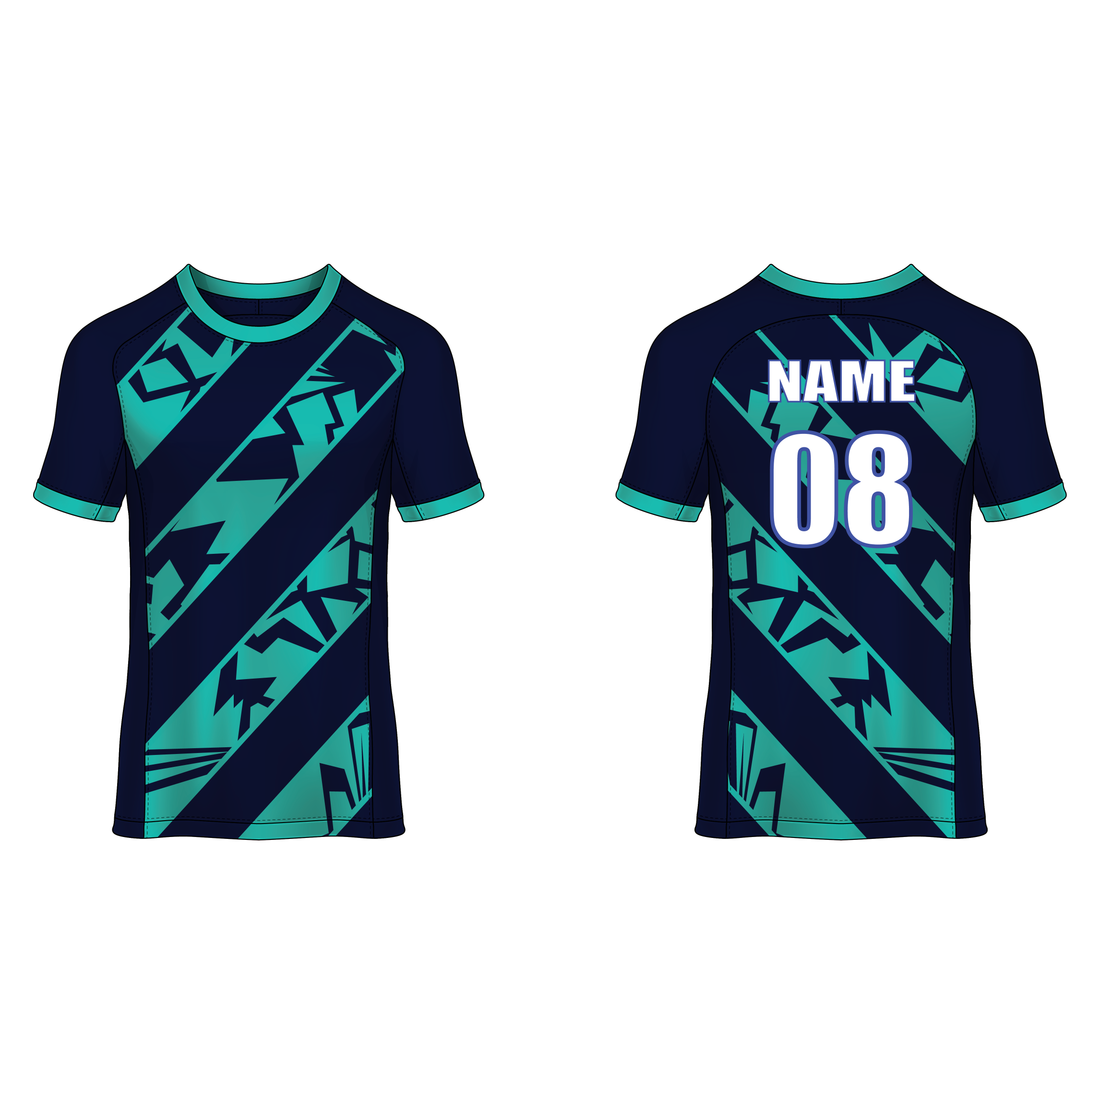 NEXT PRINT All Over Printed Customized Sublimation T-Shirt Unisex Sports Jersey Player Name & Number, Team Name NP50000274